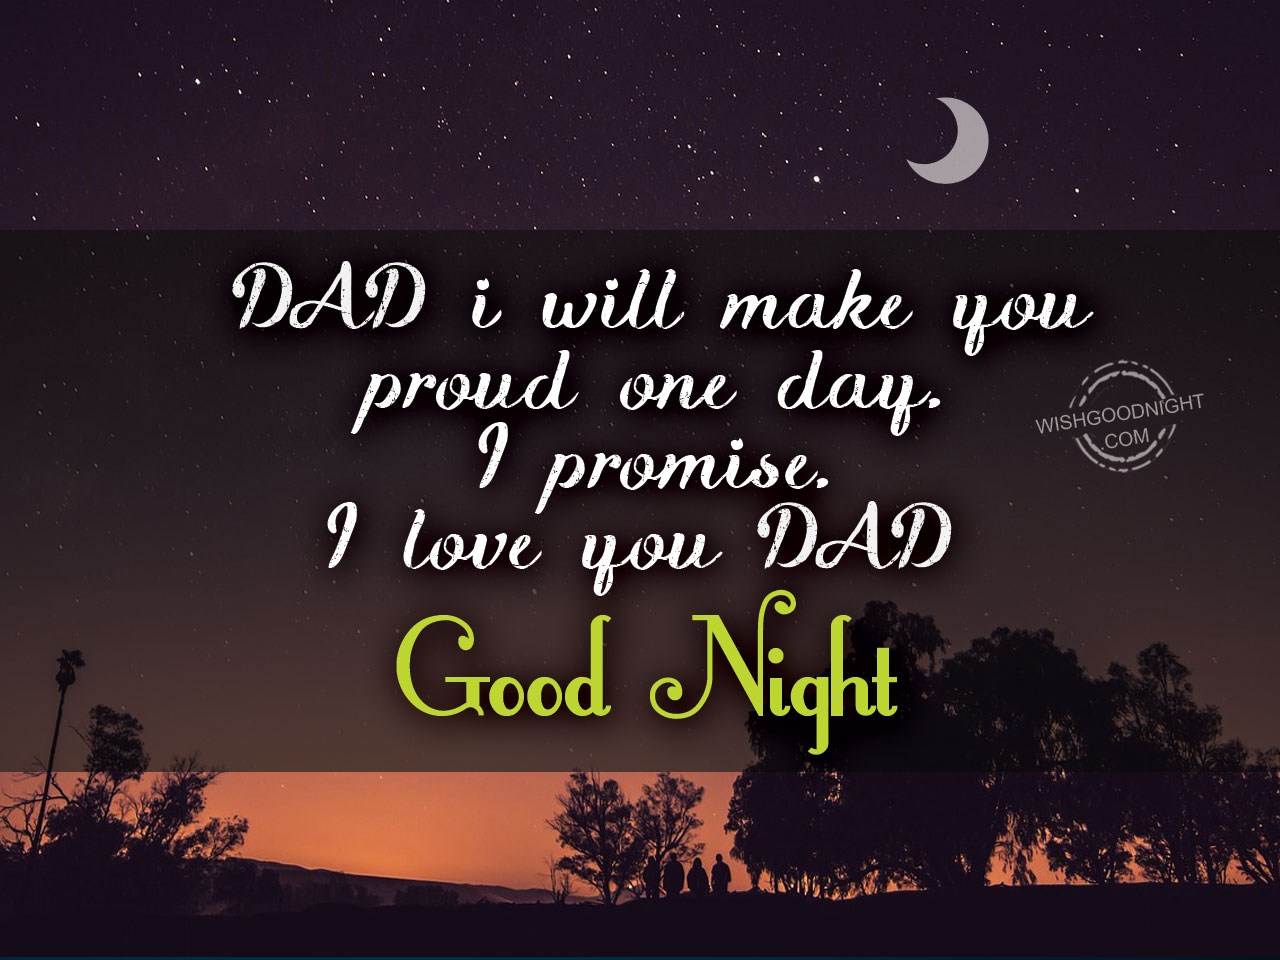 Dad I Will Make You Proud One Day Good Night Pictures Wishgoodnight Com